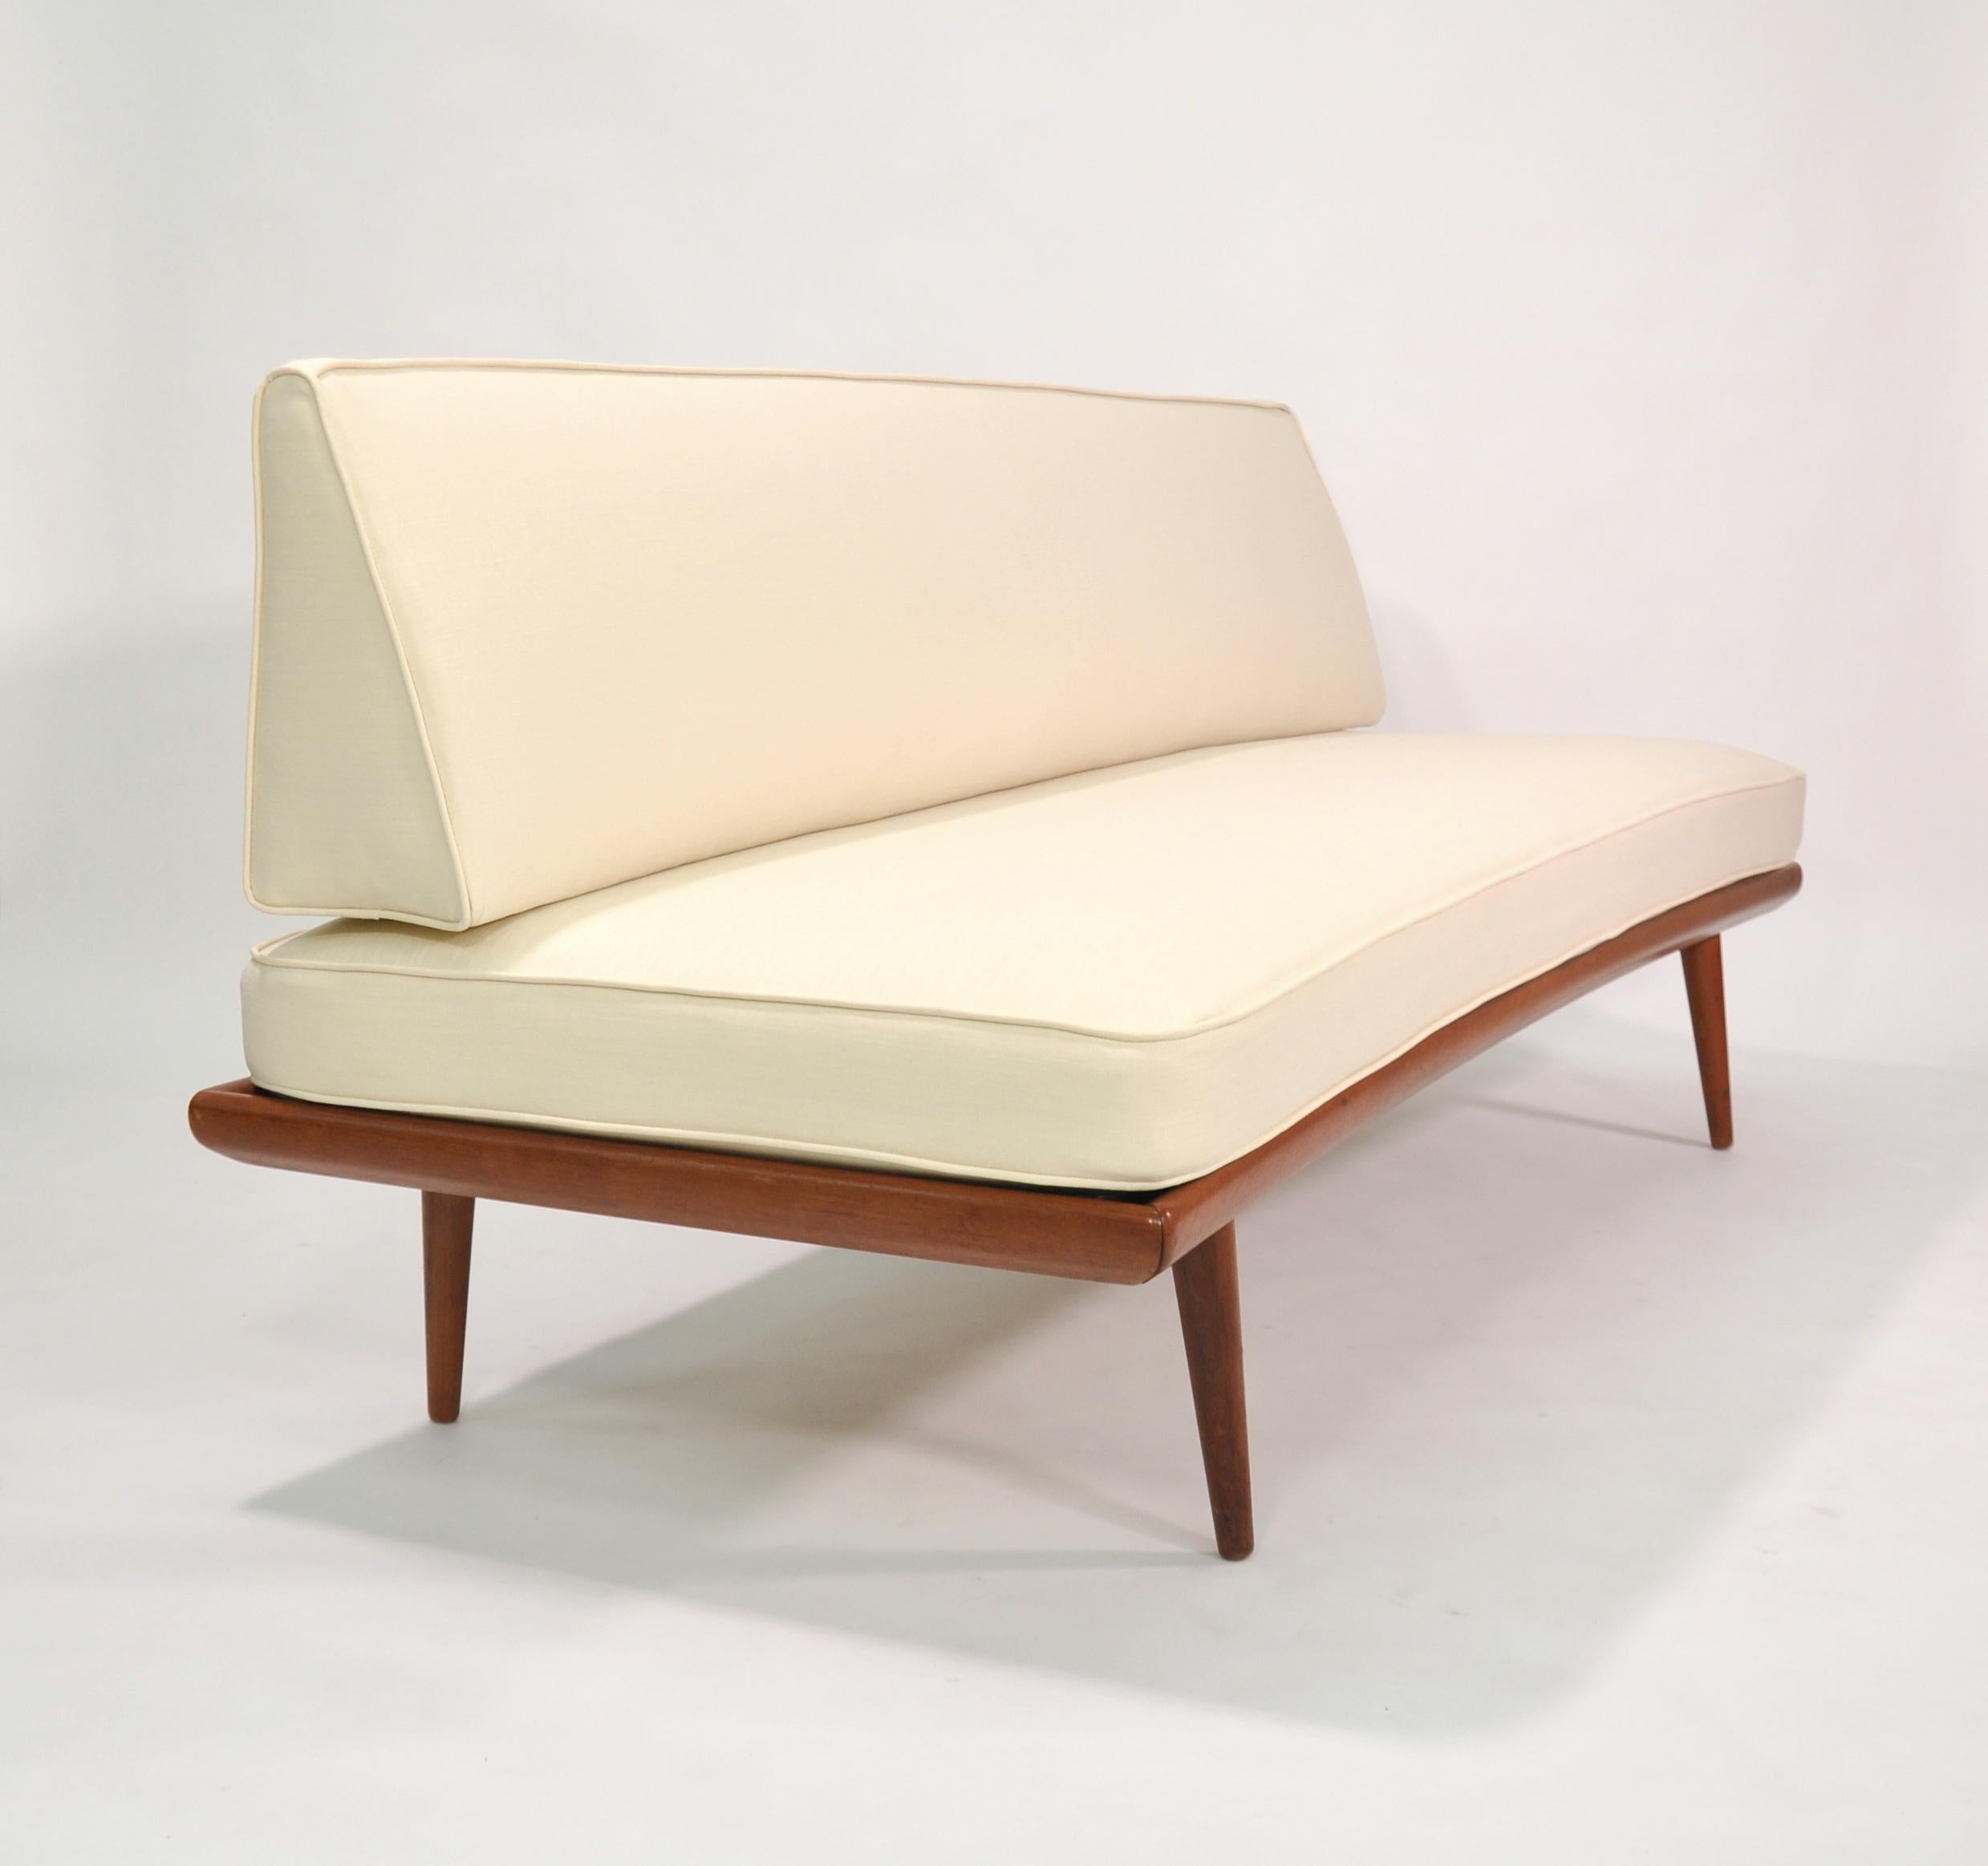 This Minerva FD 417 sofa was designed by Peter Hvidt & Orla Mølgaard-Nielsen and produced in the 1950s by France & Daverkosen (later renamed France & Son) in Denmark. It is made of solid teak and features new upholstery in a a beautiful earth tone